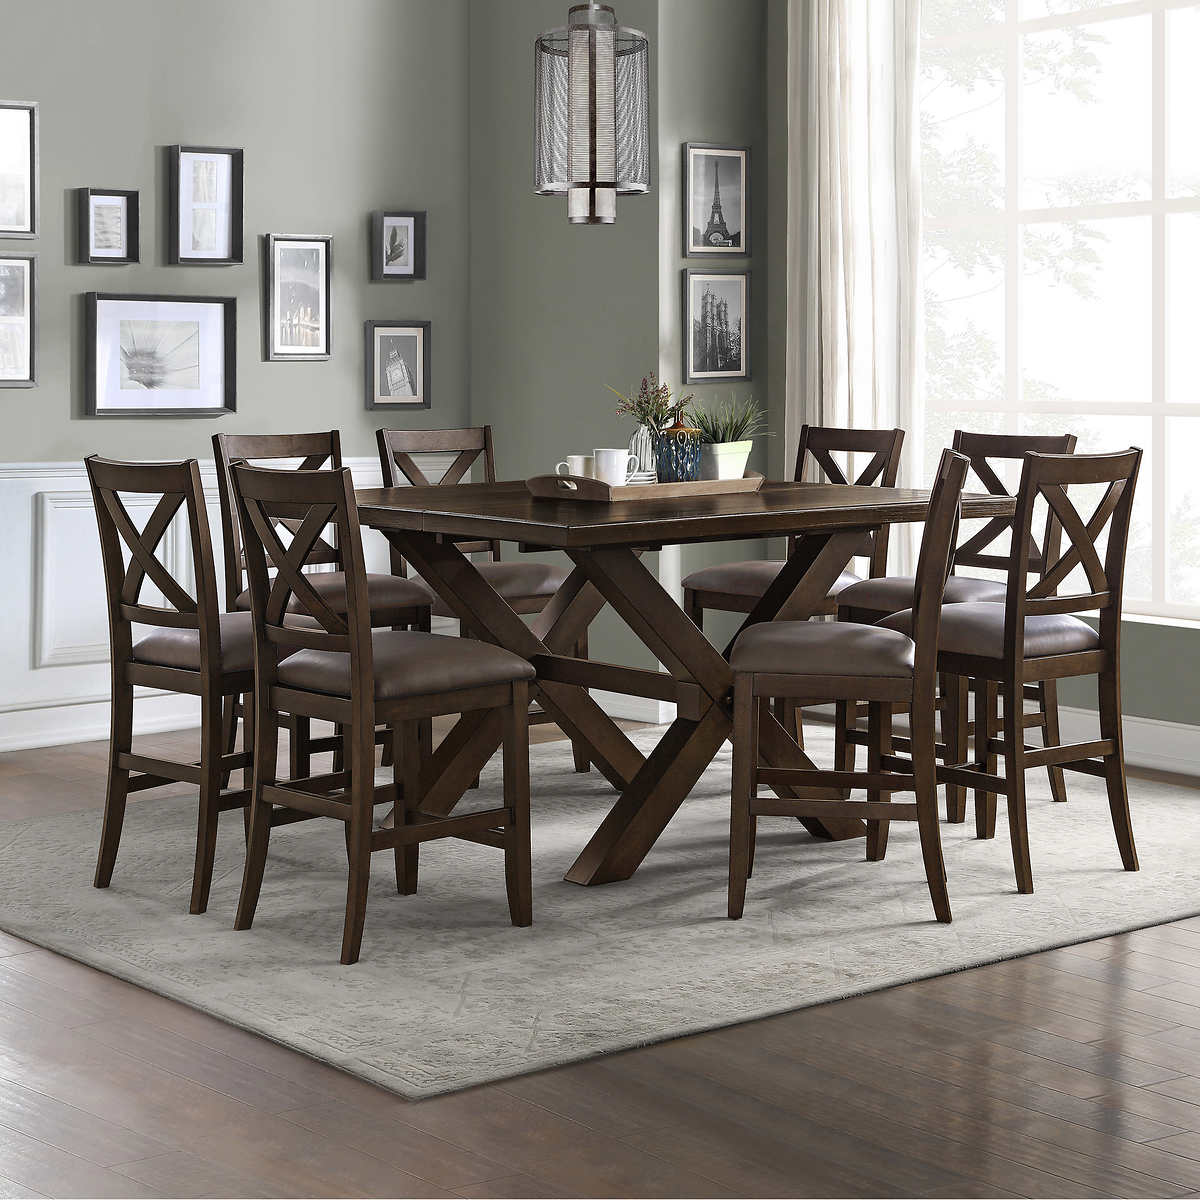 Langston 9 Piece Counter Height Dining, Counter Height Dining Table 8 Chairs